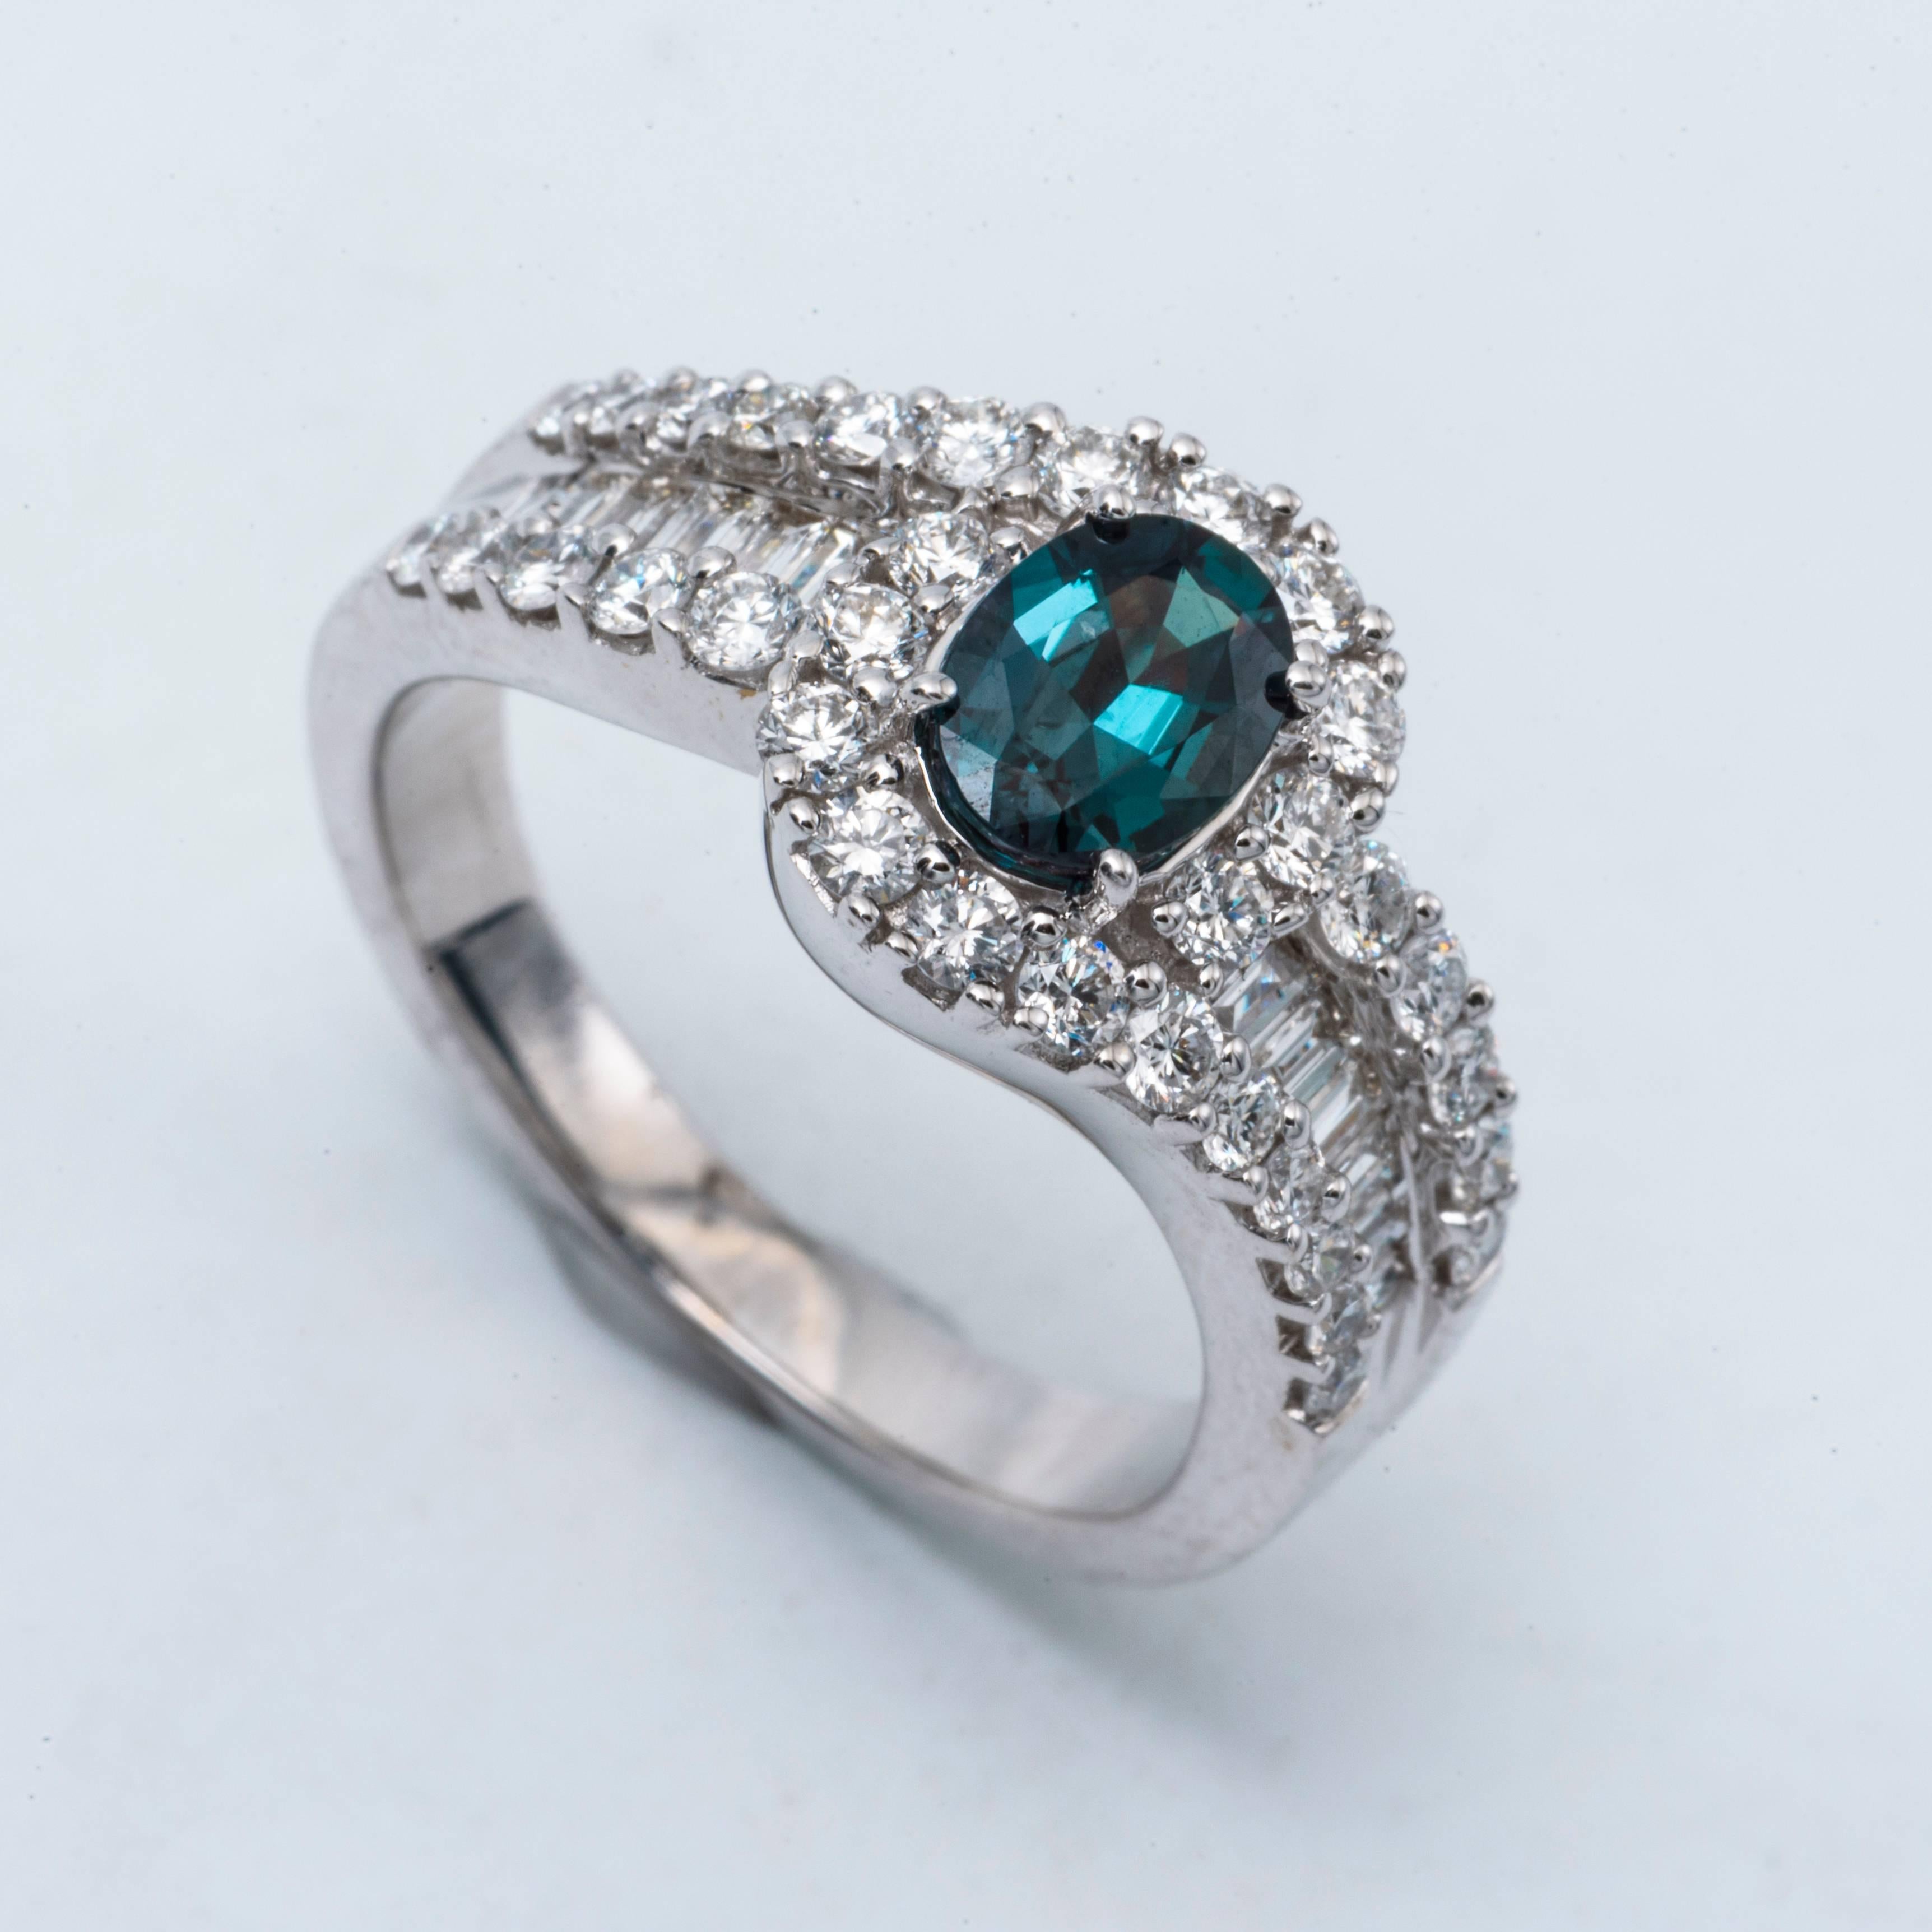 Contemporary Oval Shape Alexandrite and Diamond Ring with Certificate 0.75 Carat